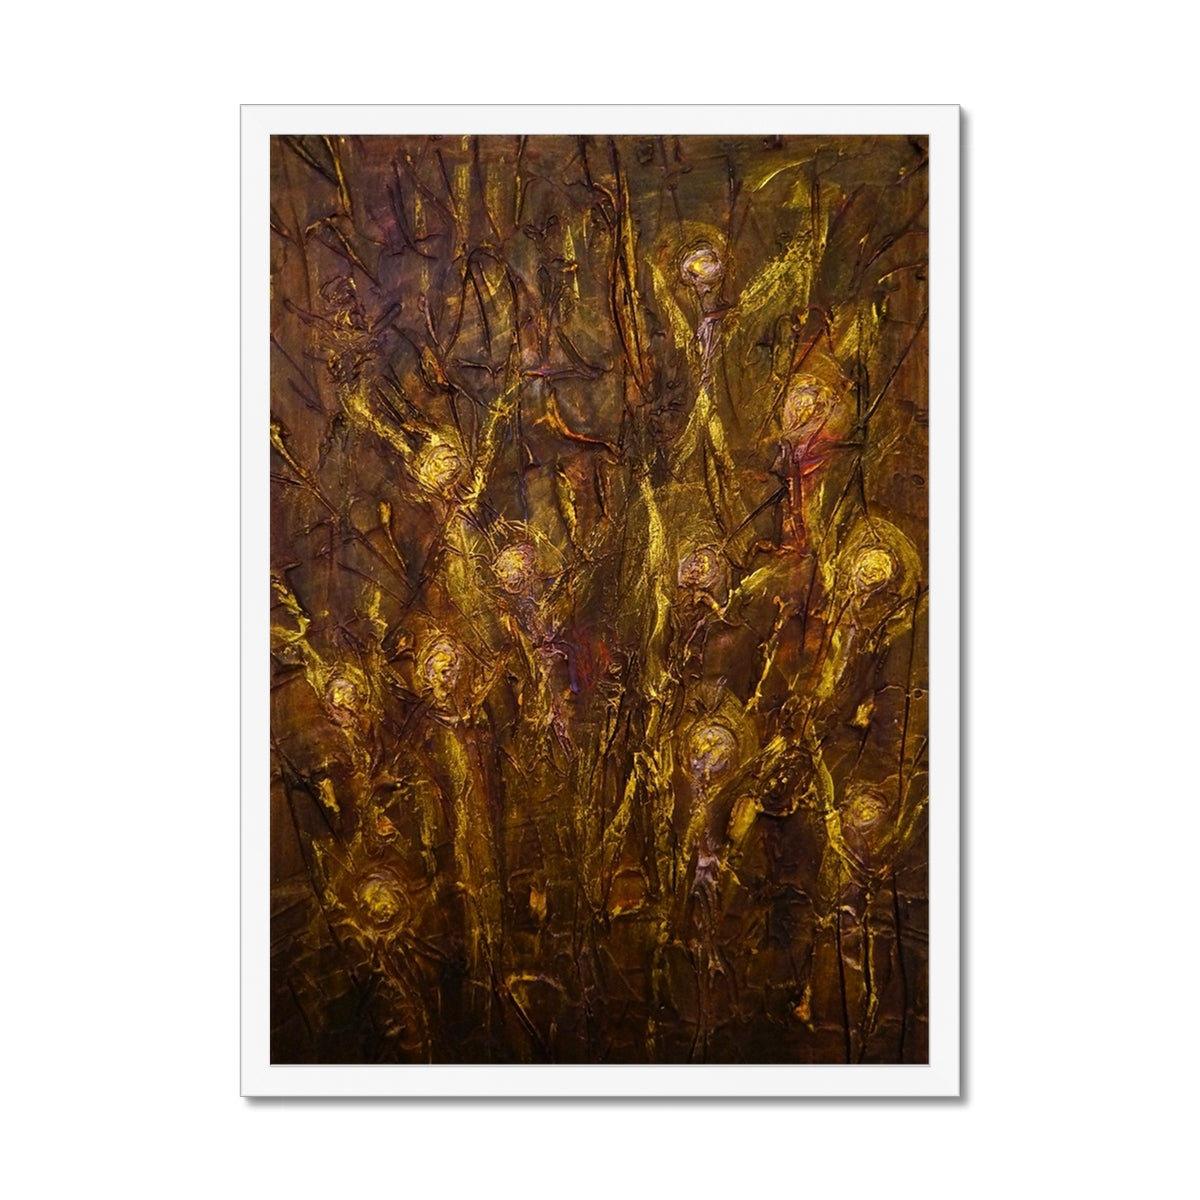 Tam O Shanter Witches Painting | Framed Prints From Scotland-Framed Prints-Abstract & Impressionistic Art Gallery-A2 Portrait-White Frame-Paintings, Prints, Homeware, Art Gifts From Scotland By Scottish Artist Kevin Hunter